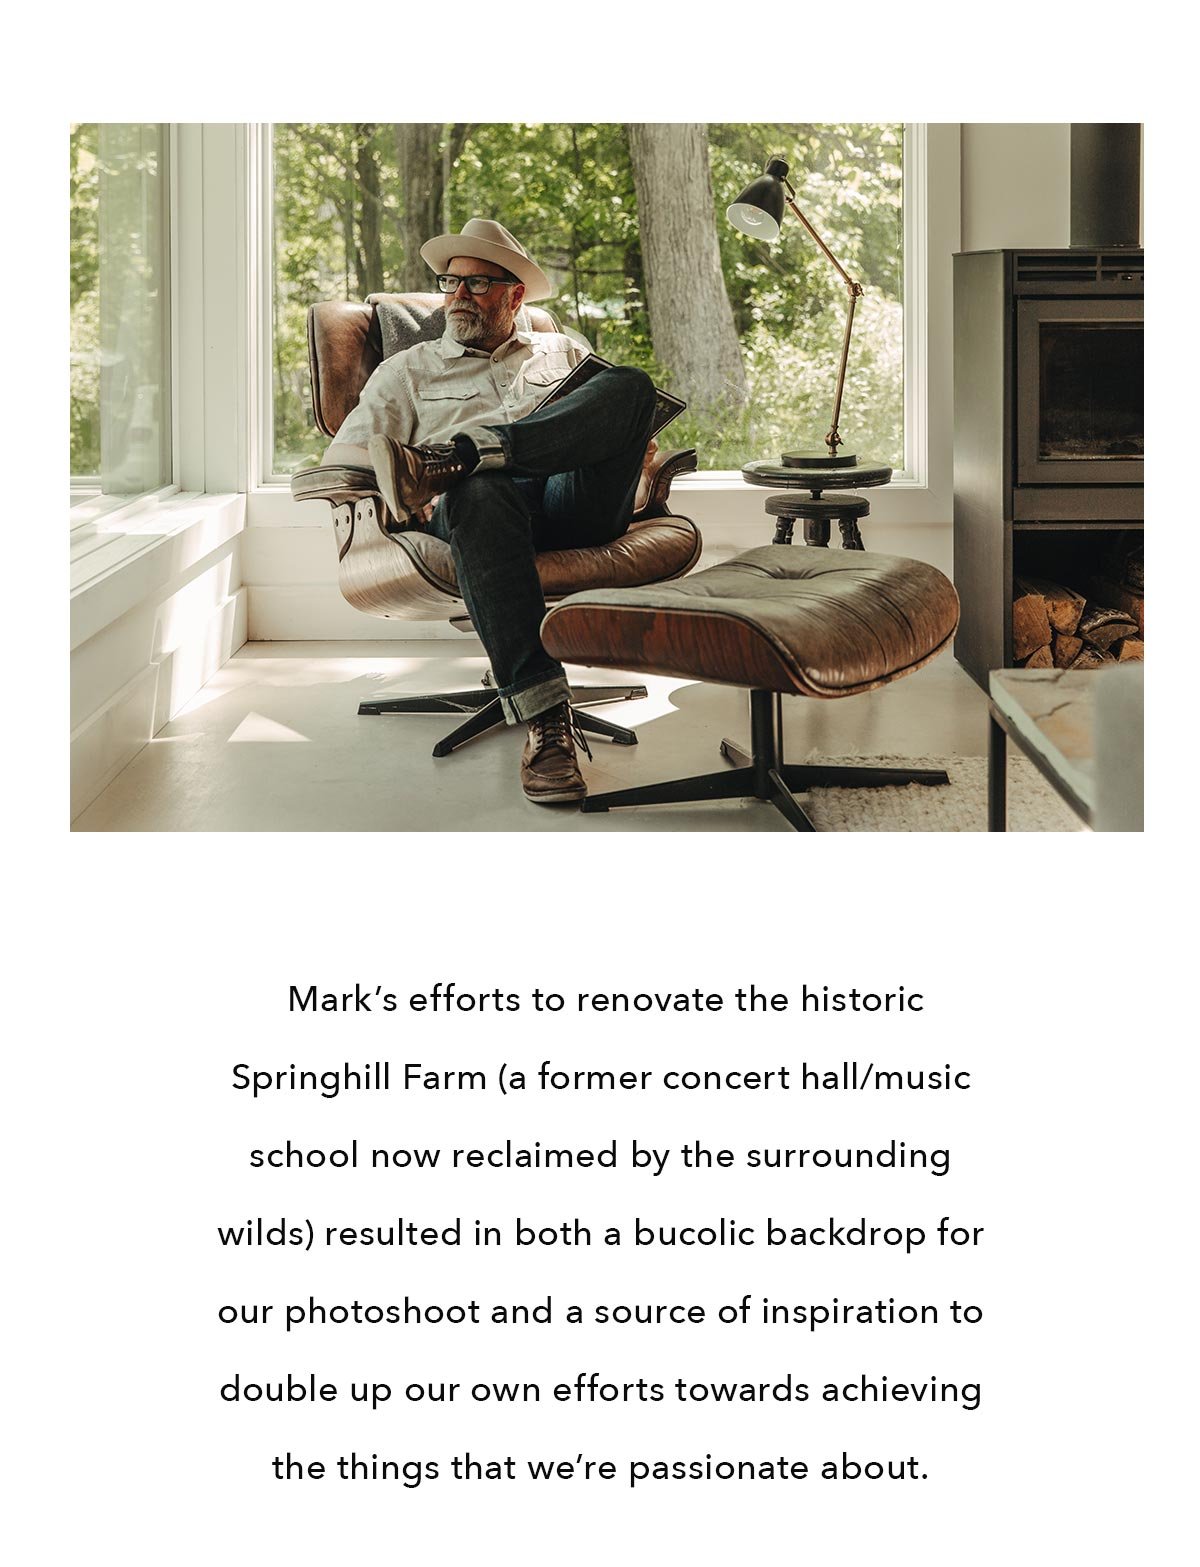  Mark’s efforts to renovate the historic Springhill Farm (a former concert hall/music school now reclaimed by the surrounding wilds) resulted in both a bucolic backdrop for our photoshoot and a source of inspiration to double up our own efforts towards achieving the things that we’re passionate about. 